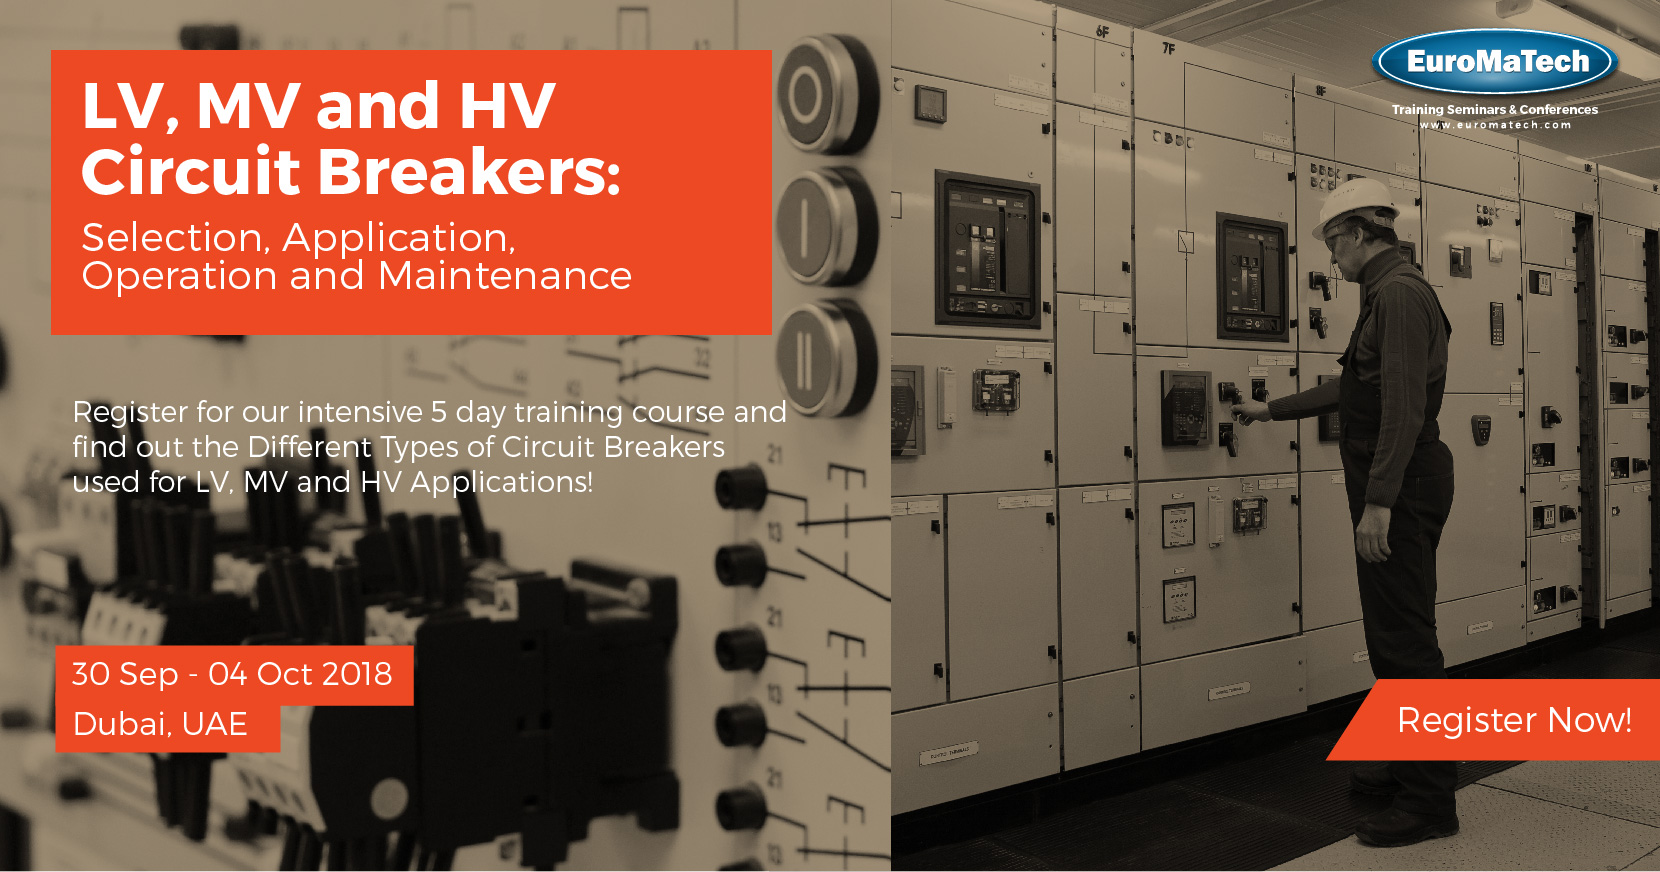 LV, MV and HV Circuit Breakers Training Course